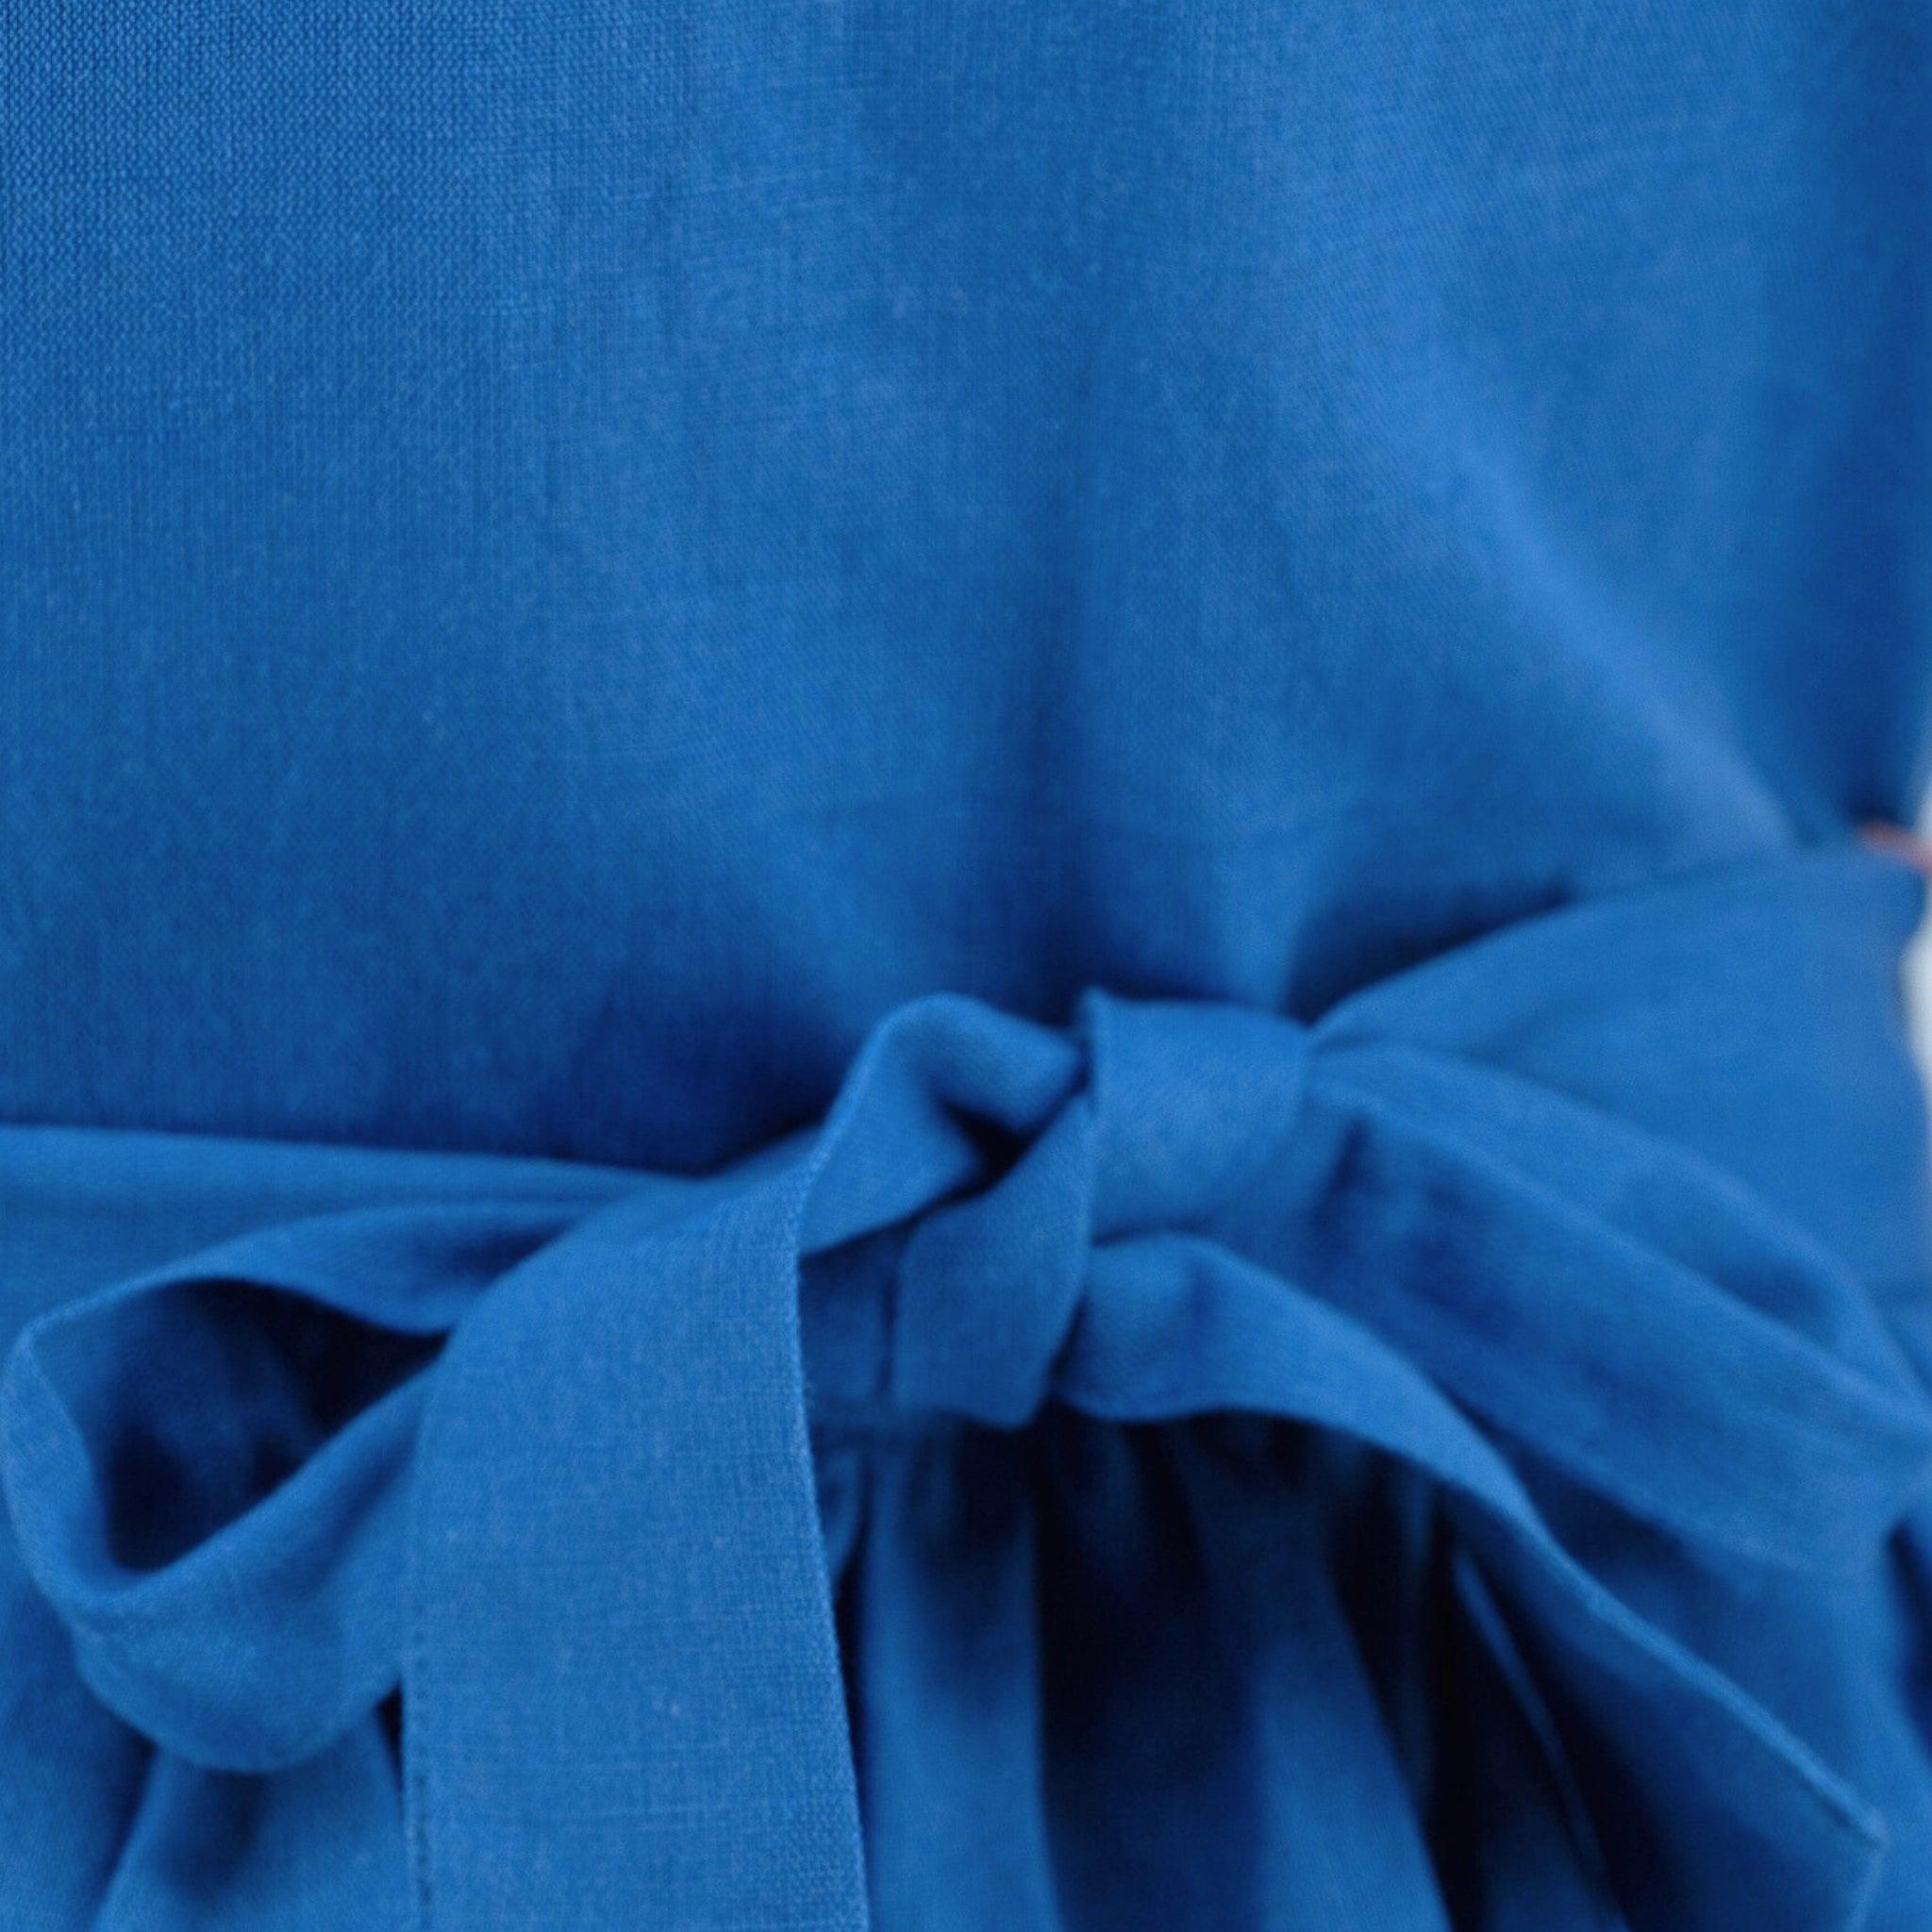 Close-up of a Karee Parisian Blue Linen Dress for Girls with a bow detail, focusing on the texture and folds of the material.